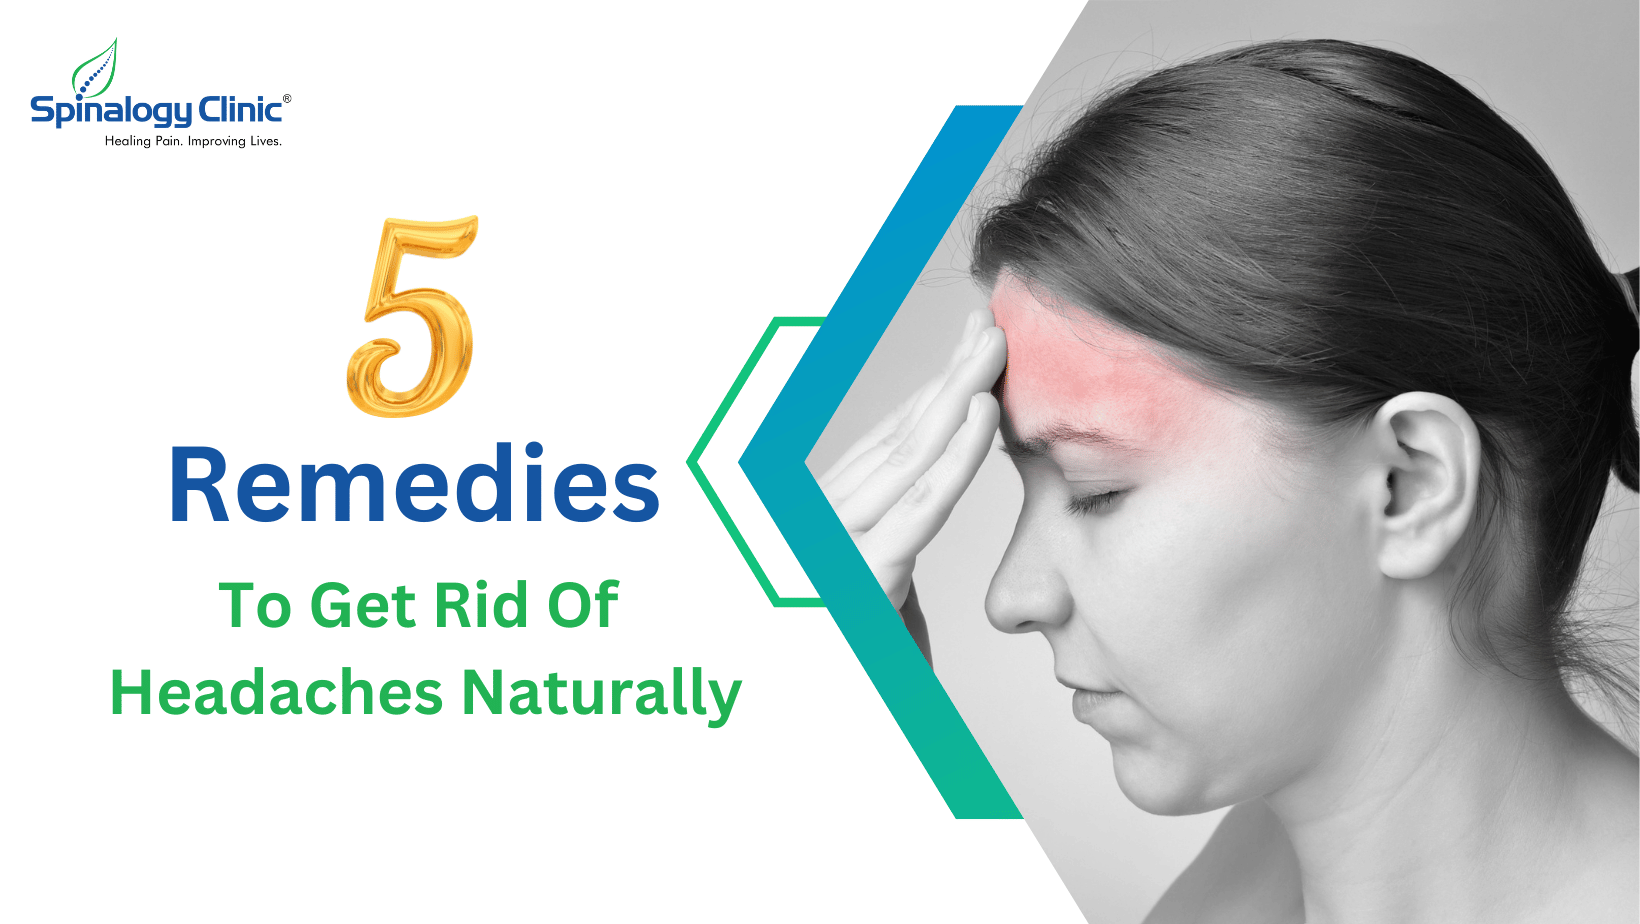 5 Remedies To Get Rid Of Headaches Naturally